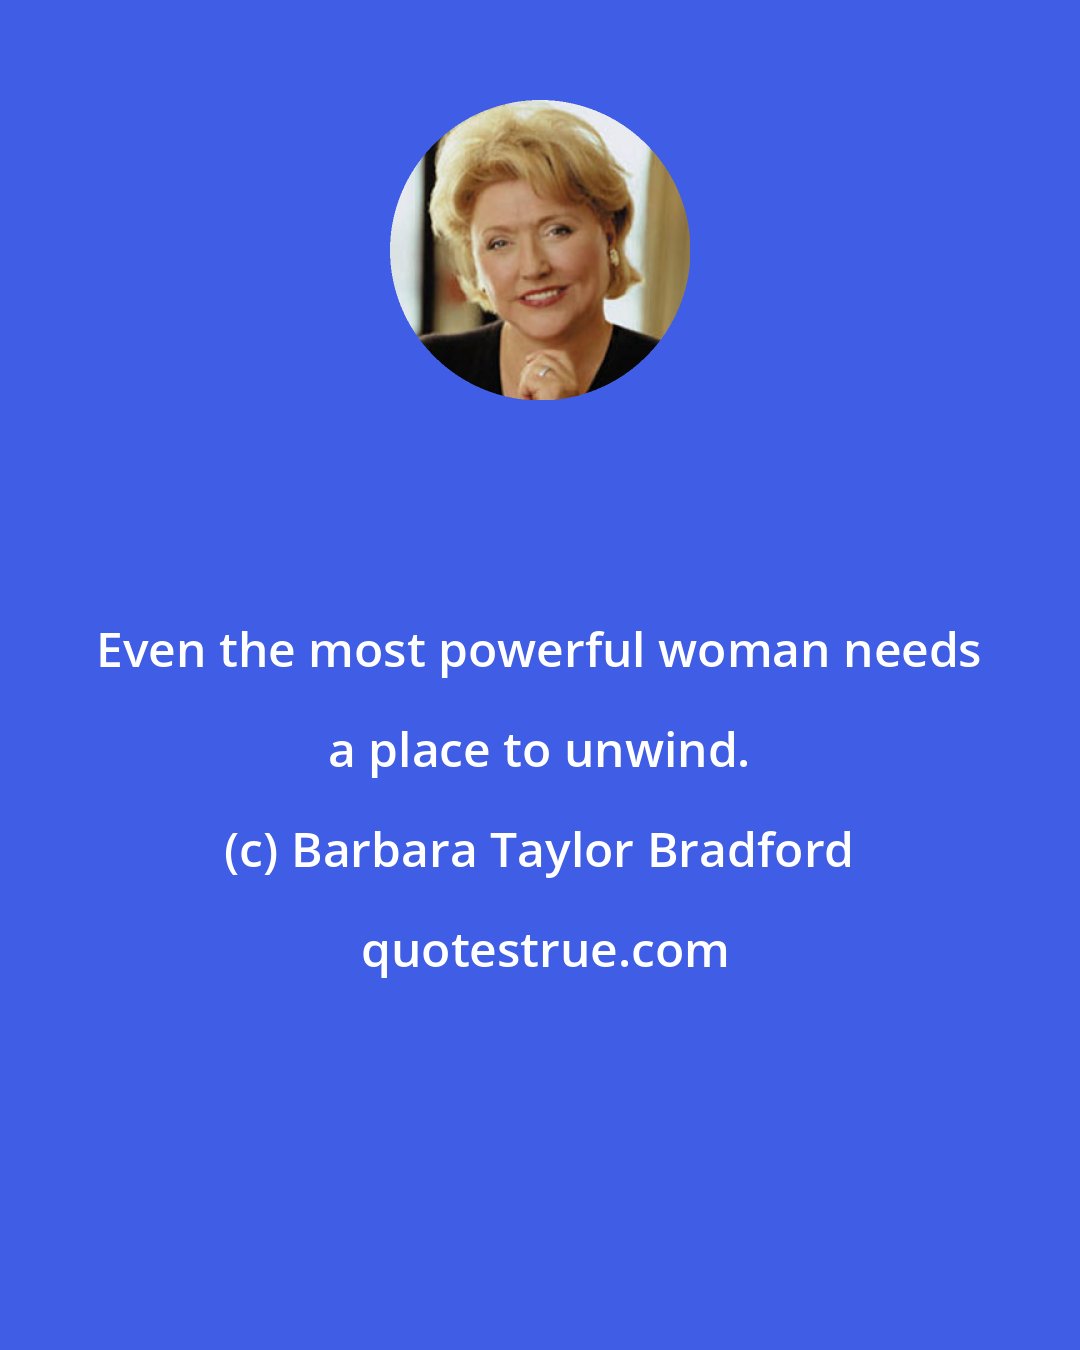 Barbara Taylor Bradford: Even the most powerful woman needs a place to unwind.